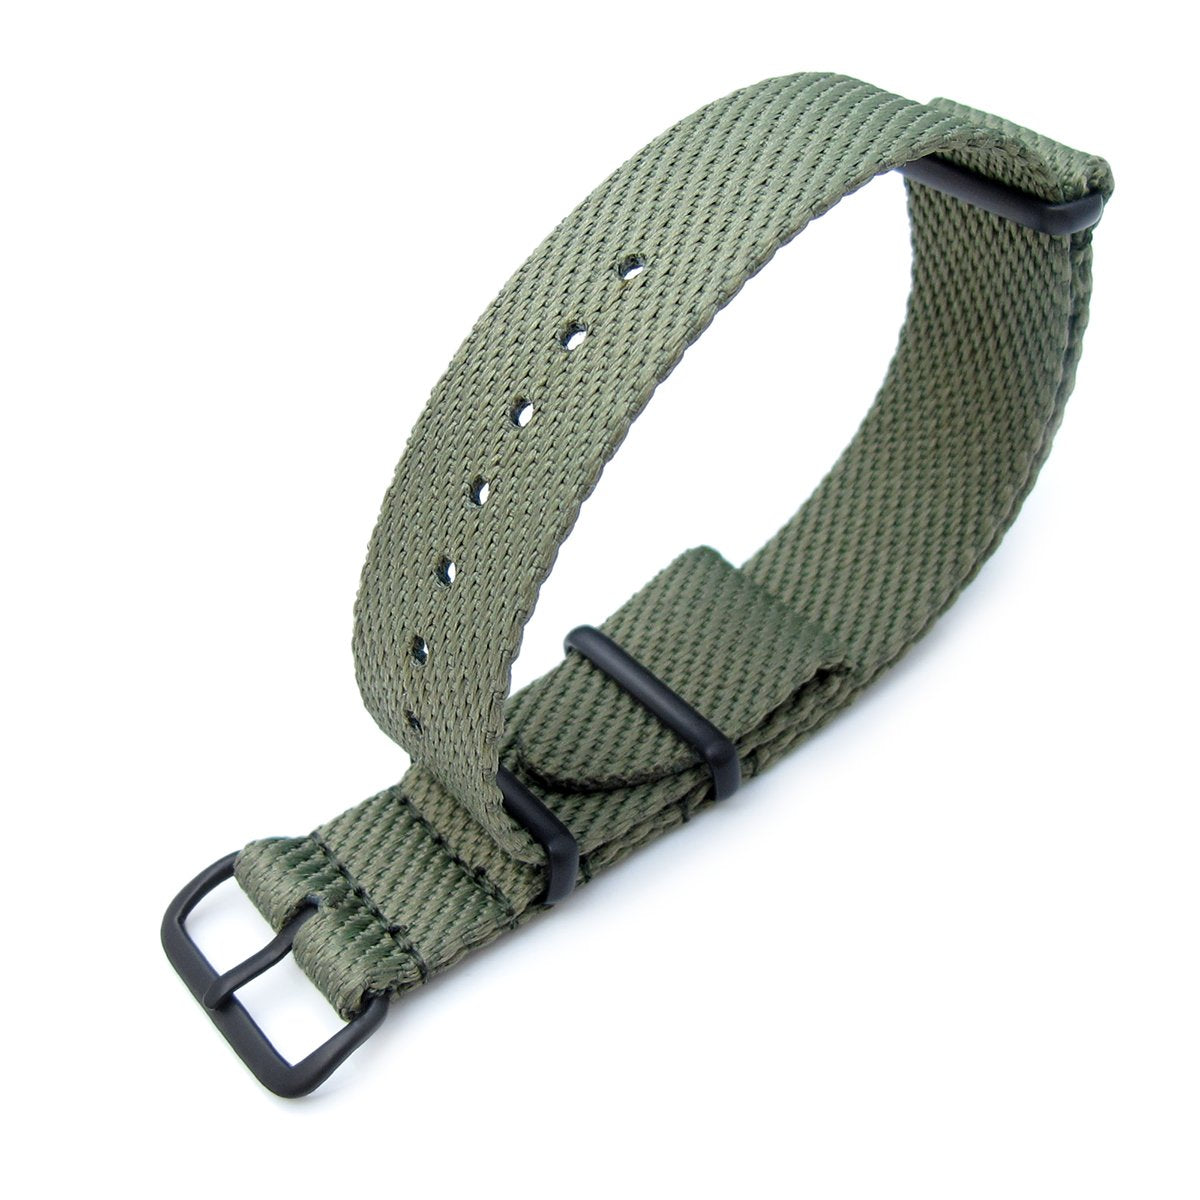 MiLTAT 20mm G10 Military NATO Watch Strap Waffle Nylon Armband PVD Military Green Strapcode Watch Bands